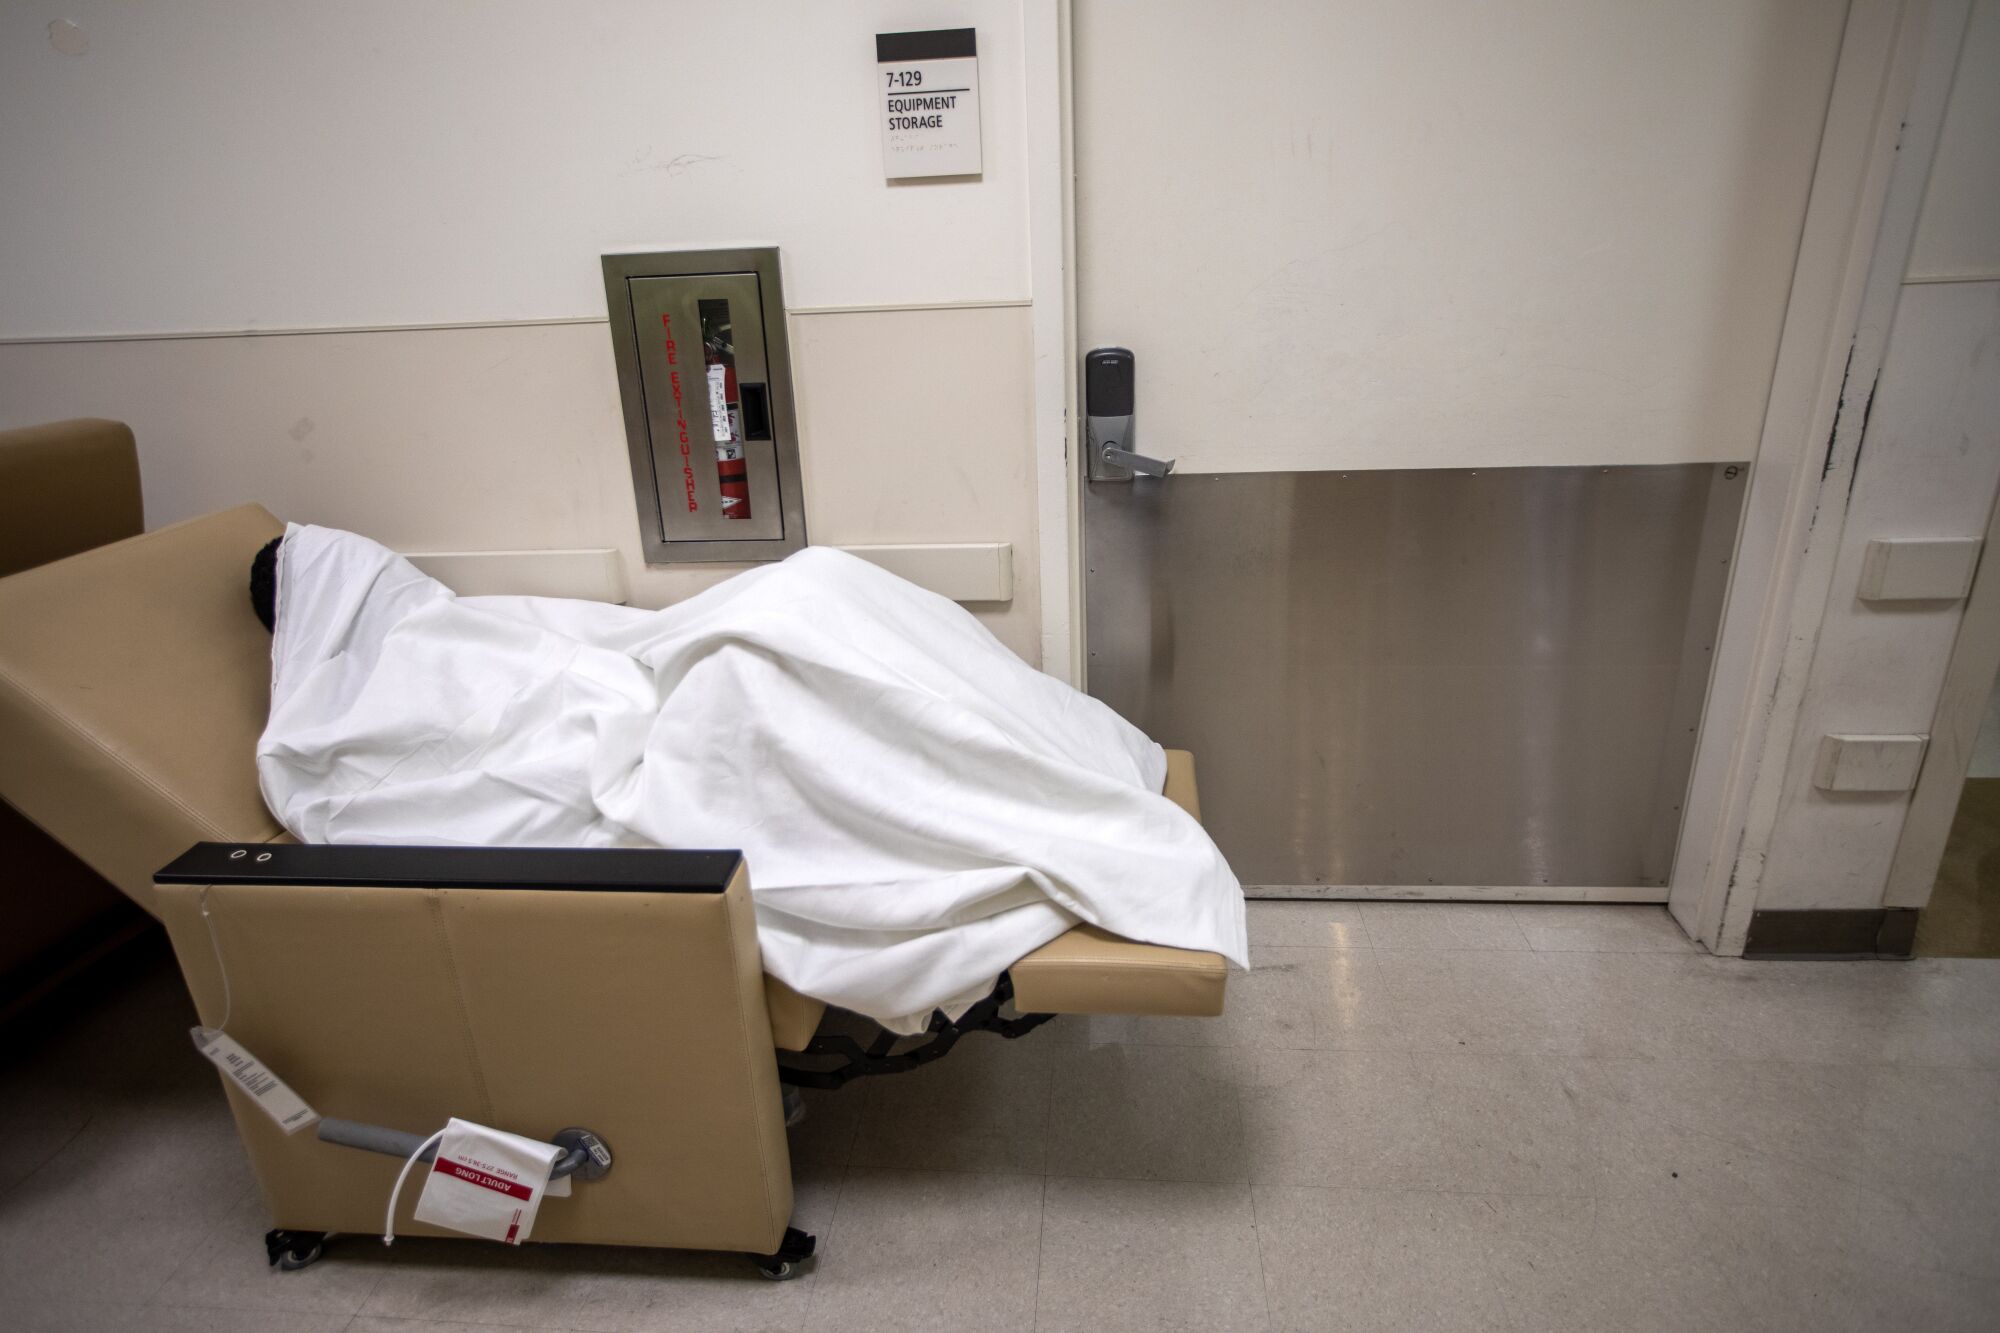 A hospital patient, covered with a blanket, rests on a chair in the hallway